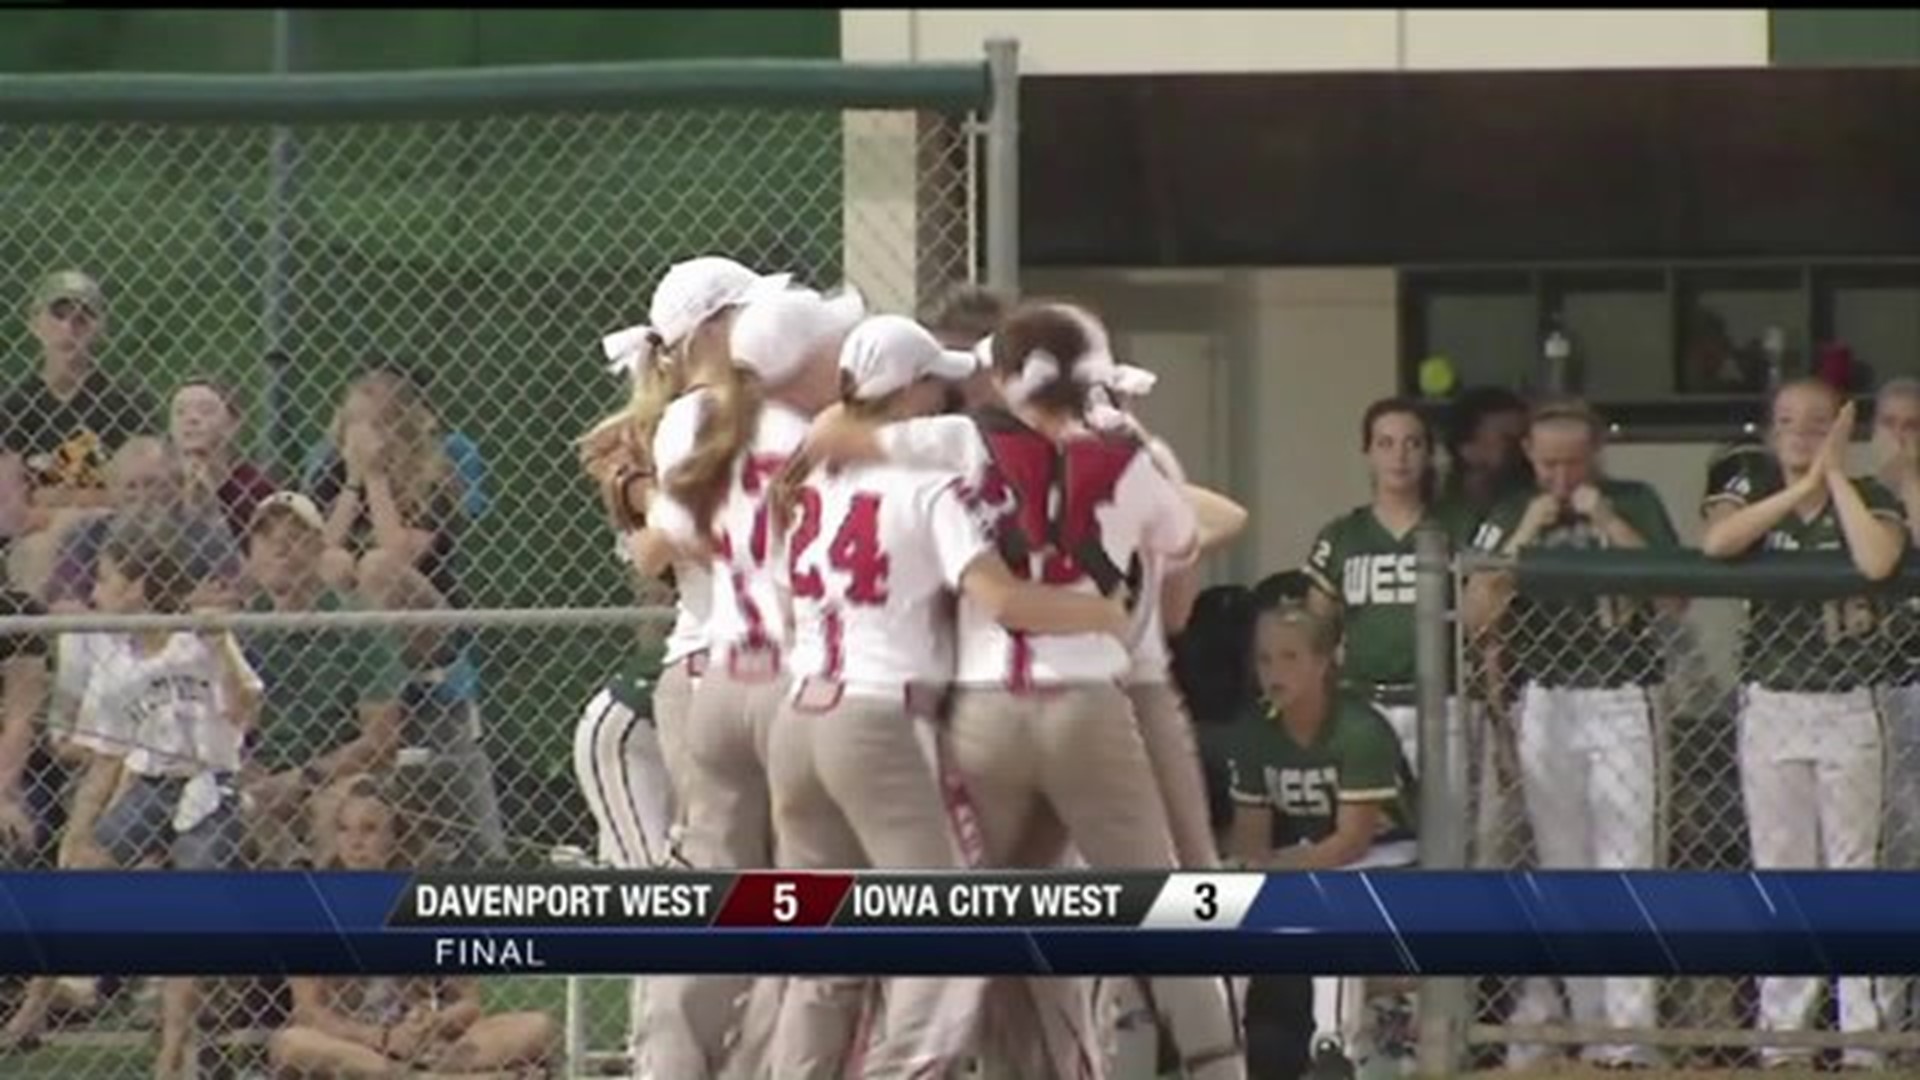 West powers their way to State, defeats IC West